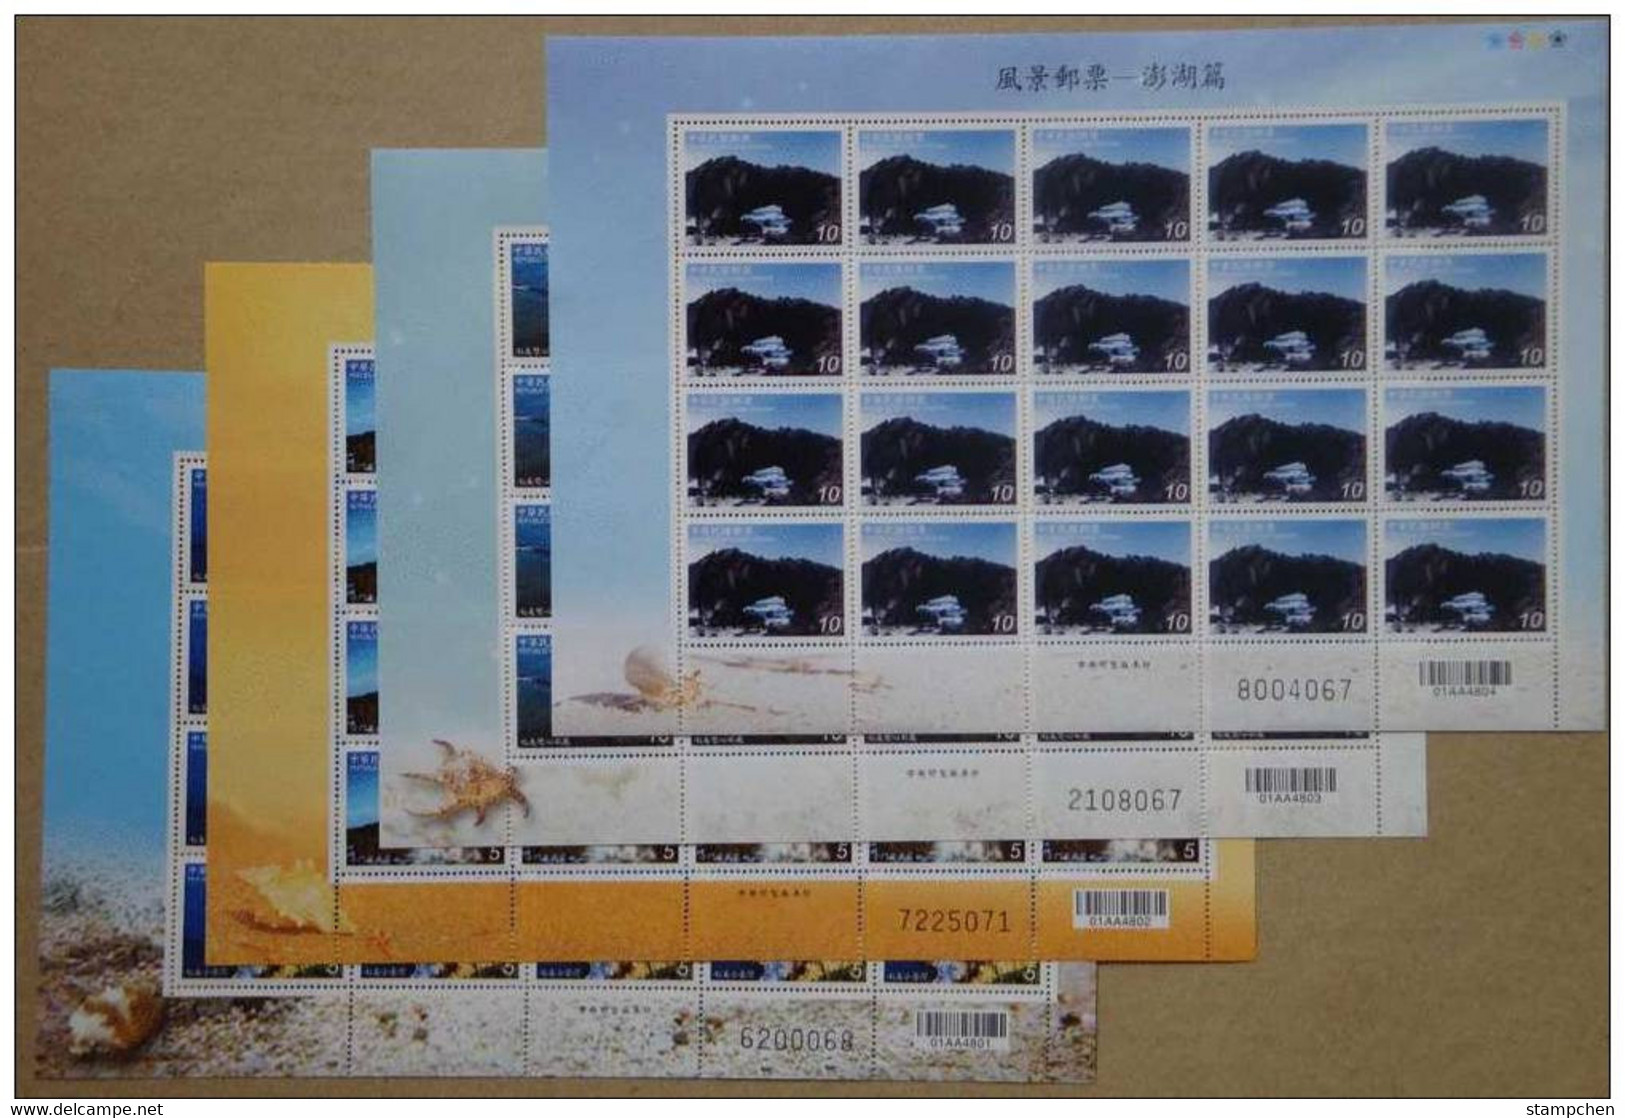 2010  Scenery Stamps Sheets- Penghu Pescadores Rock Geology Ocean Map Islet Map Whale Bridge Shell Crab - Inseln